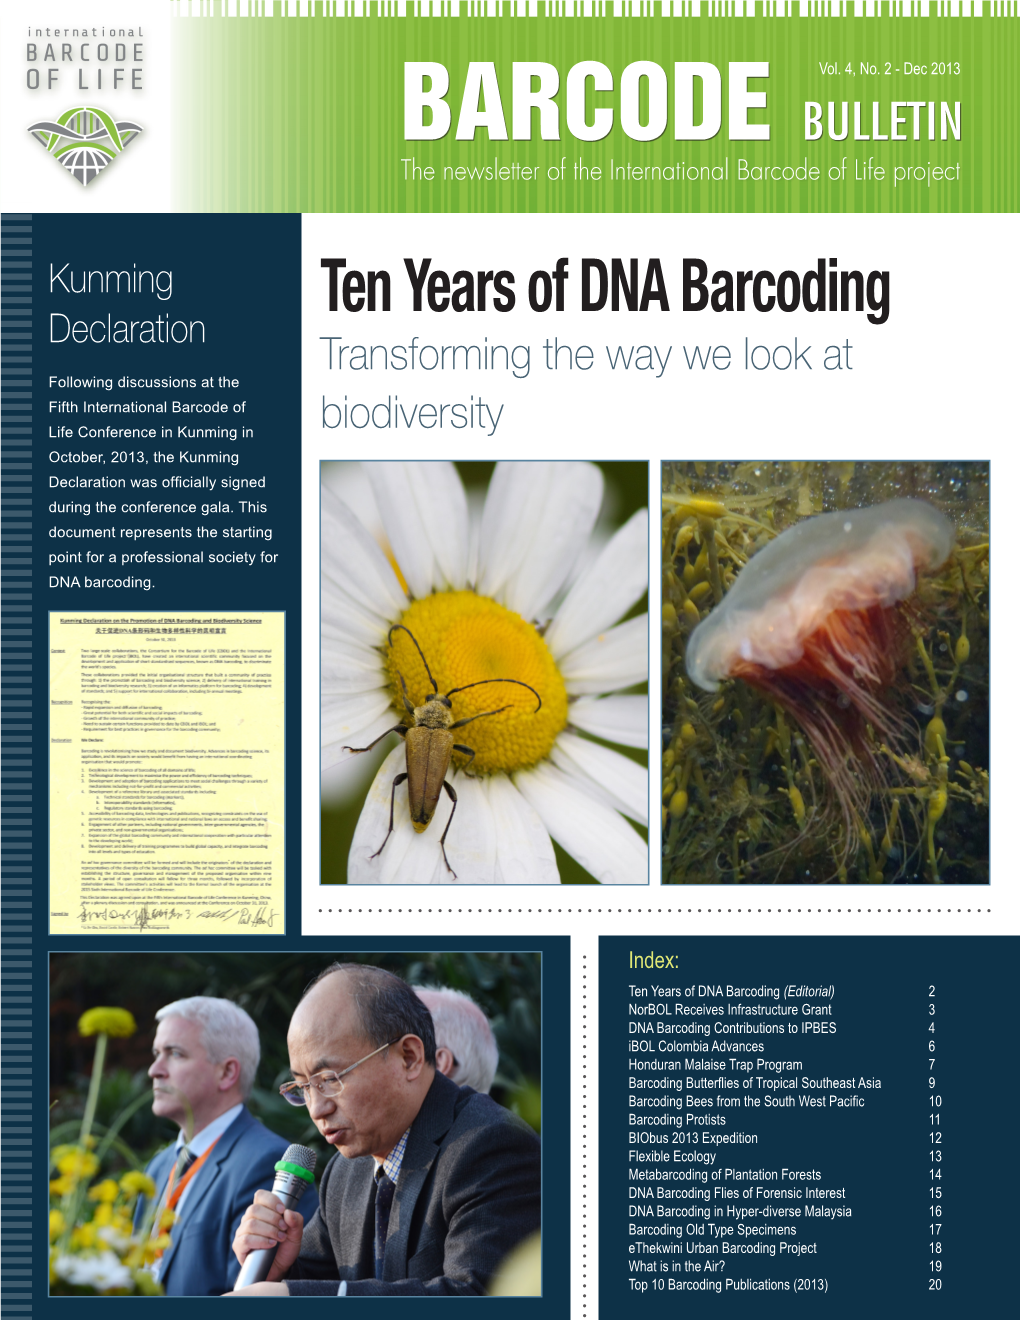 Ten Years of DNA Barcoding